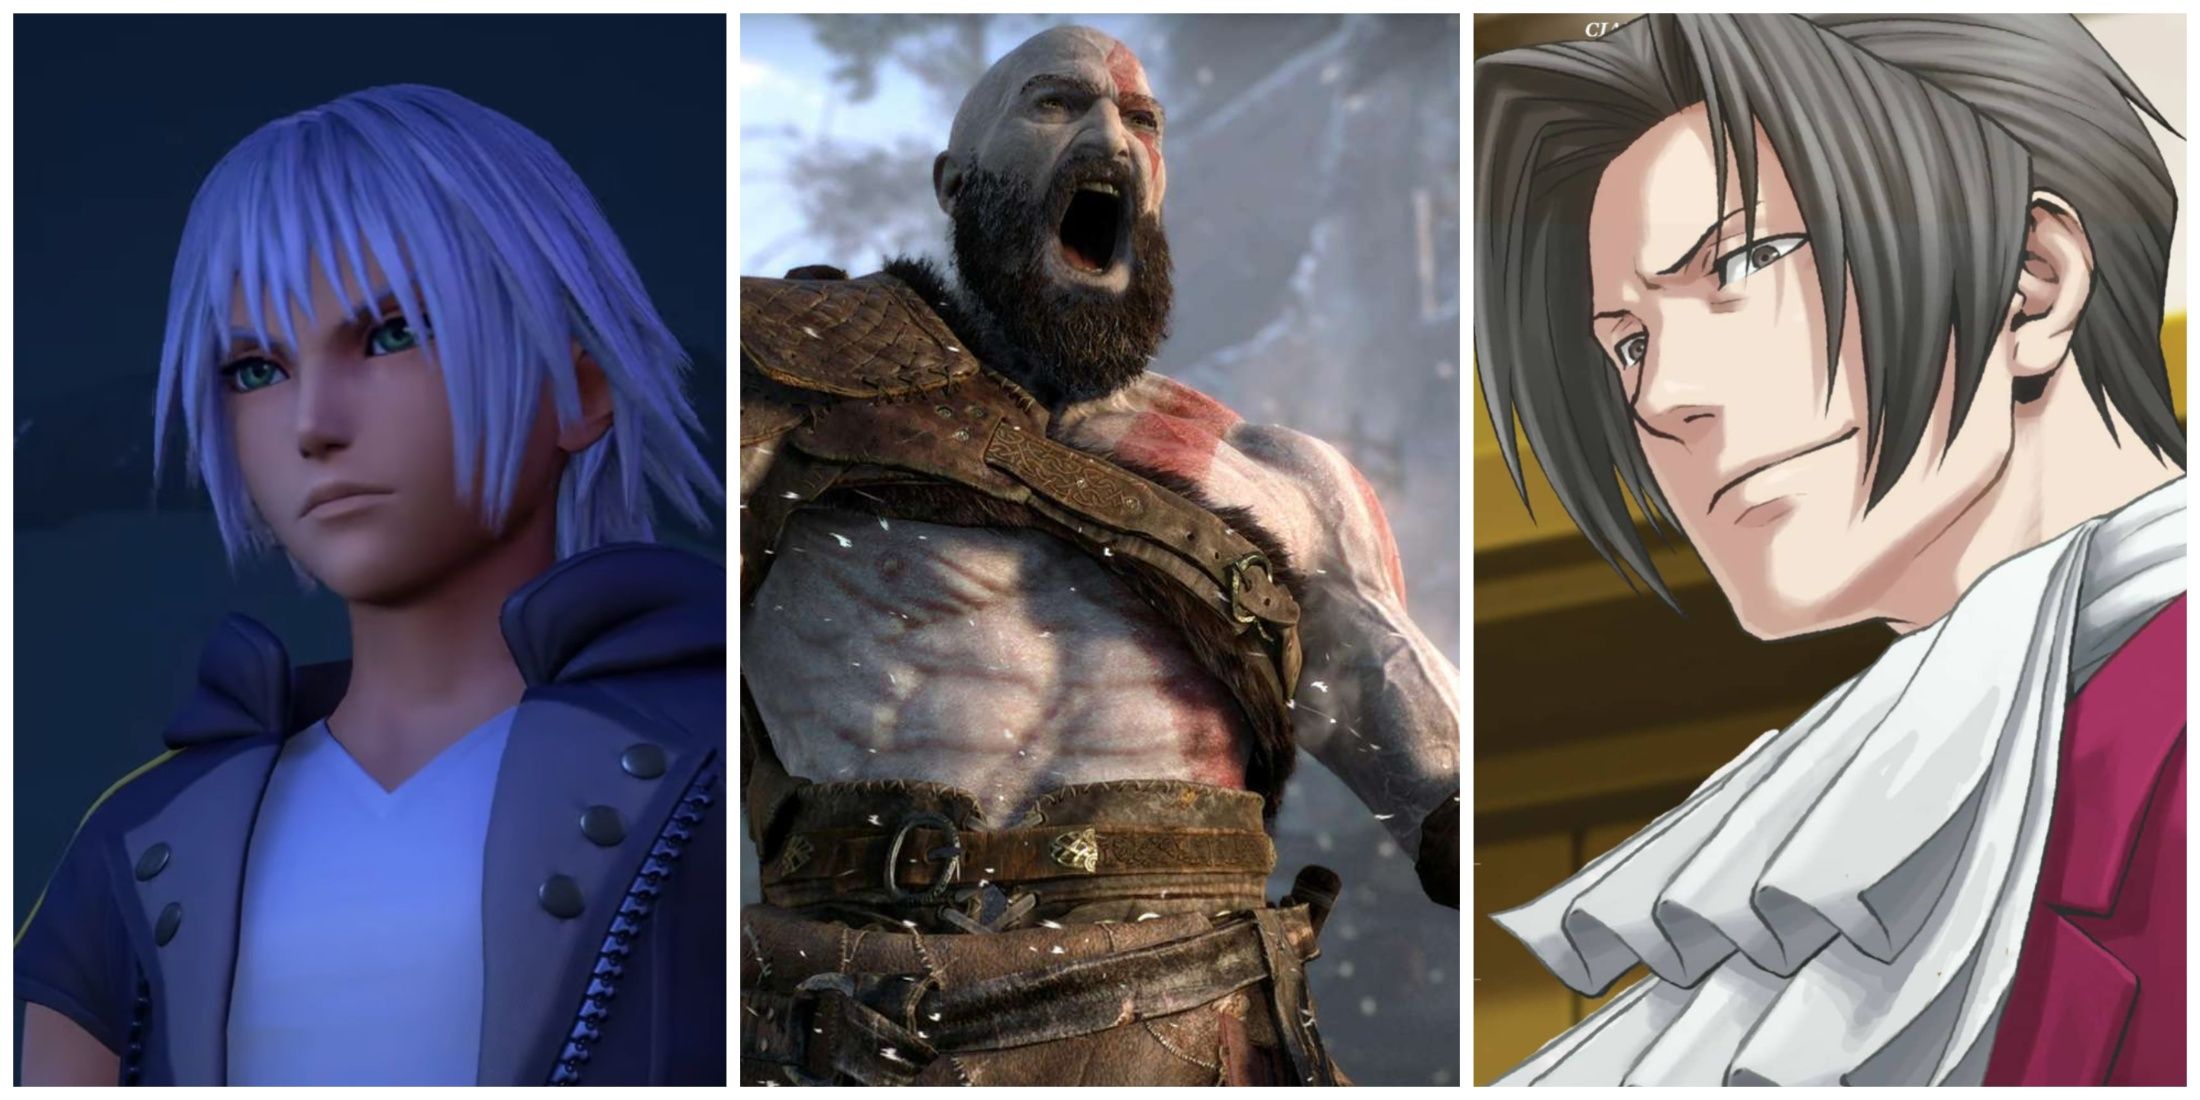 Riku from Kingdom Hearts (left), Kratos from God of War (middle), and Miles Edgeworth (right)